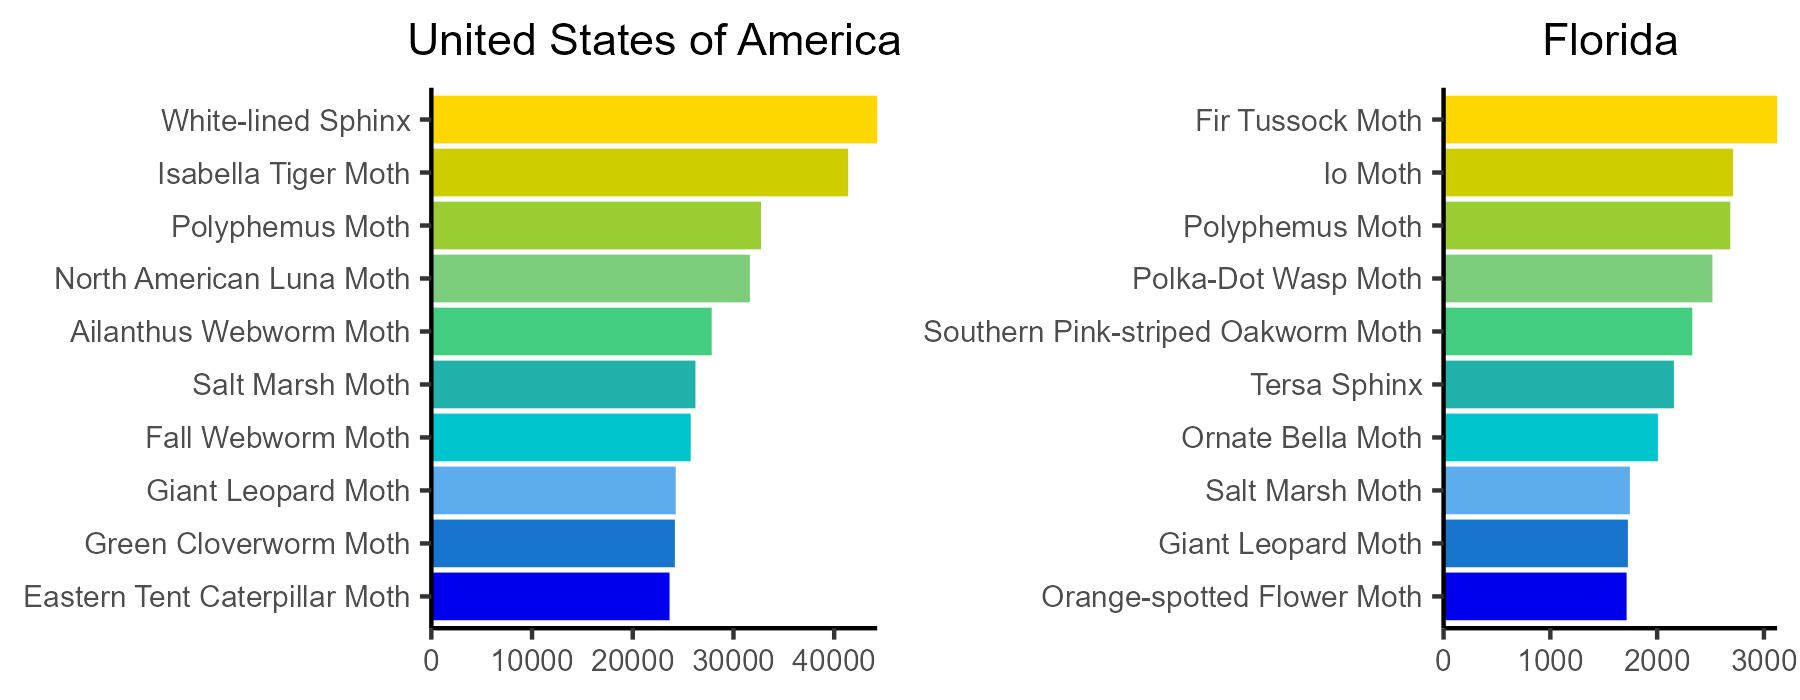 Number of iNaturalist observations for the top ten species of moths observed in the United States of America and the state of Florida.